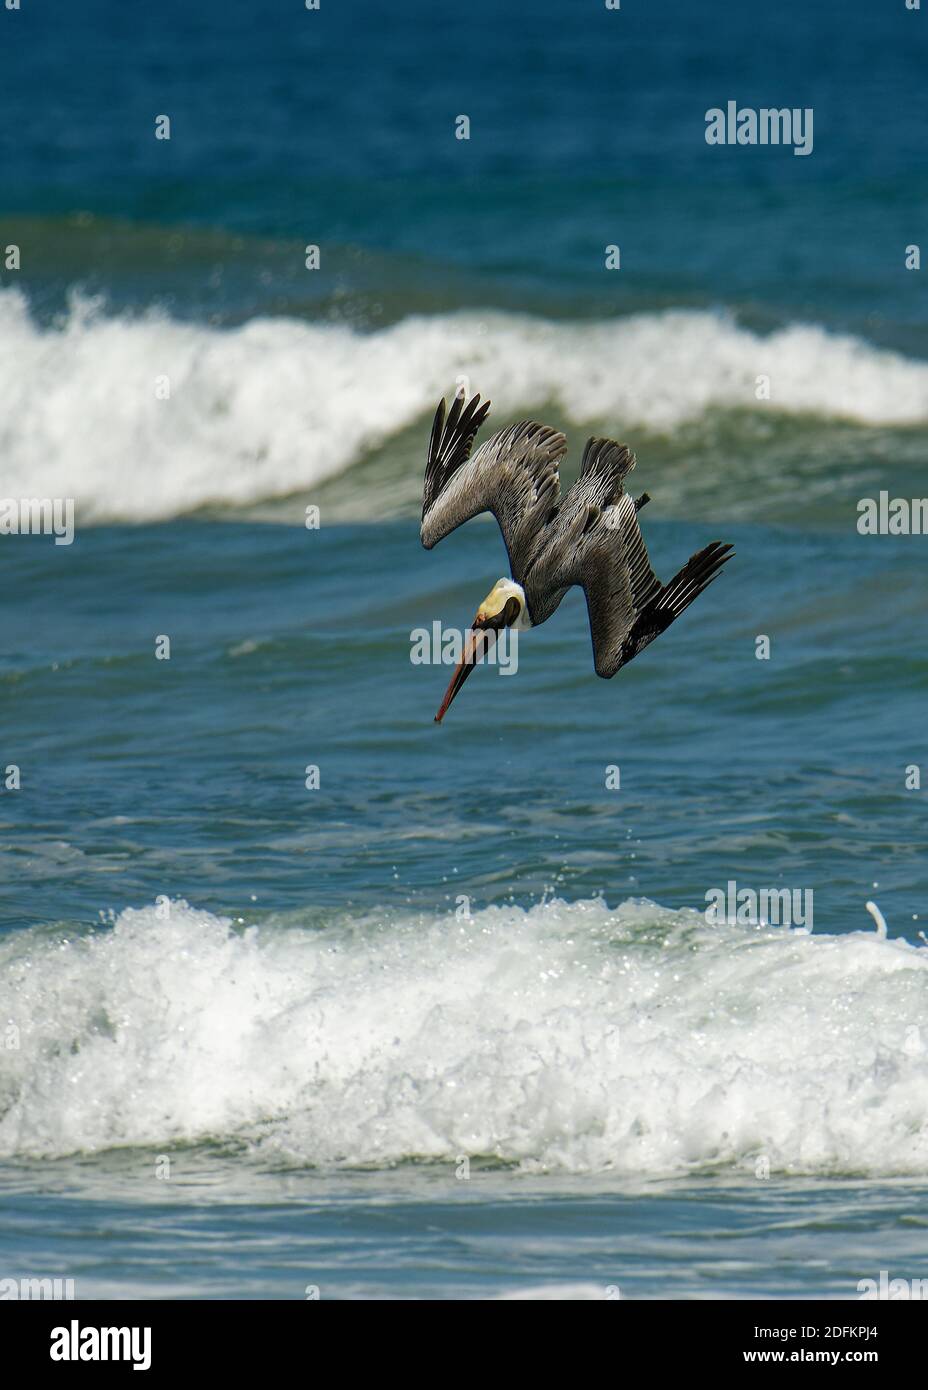 Brown pelican - Pelecanus occidentalis big bird of the pelican family, Pelecanidae, feed and hunt by diving into water. Flying and fishing, kamikaze t Stock Photo